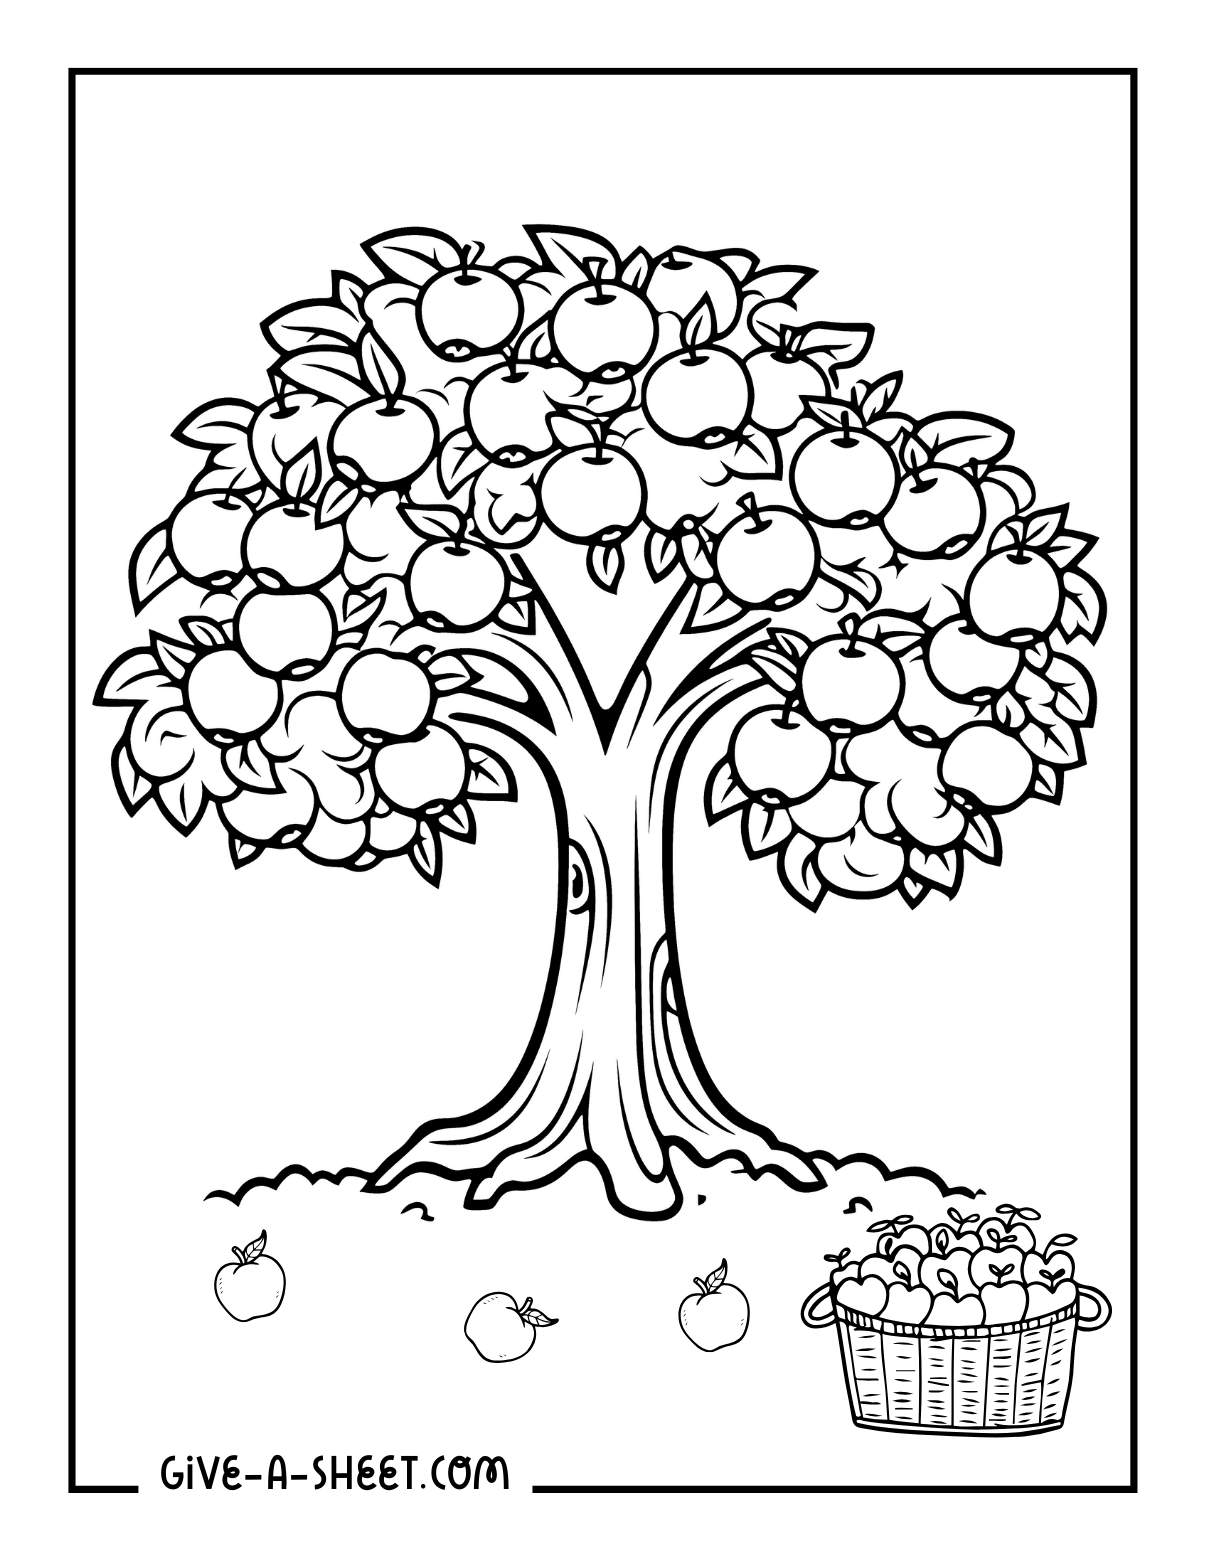 Simple apple tree coloring page with basket of apples.